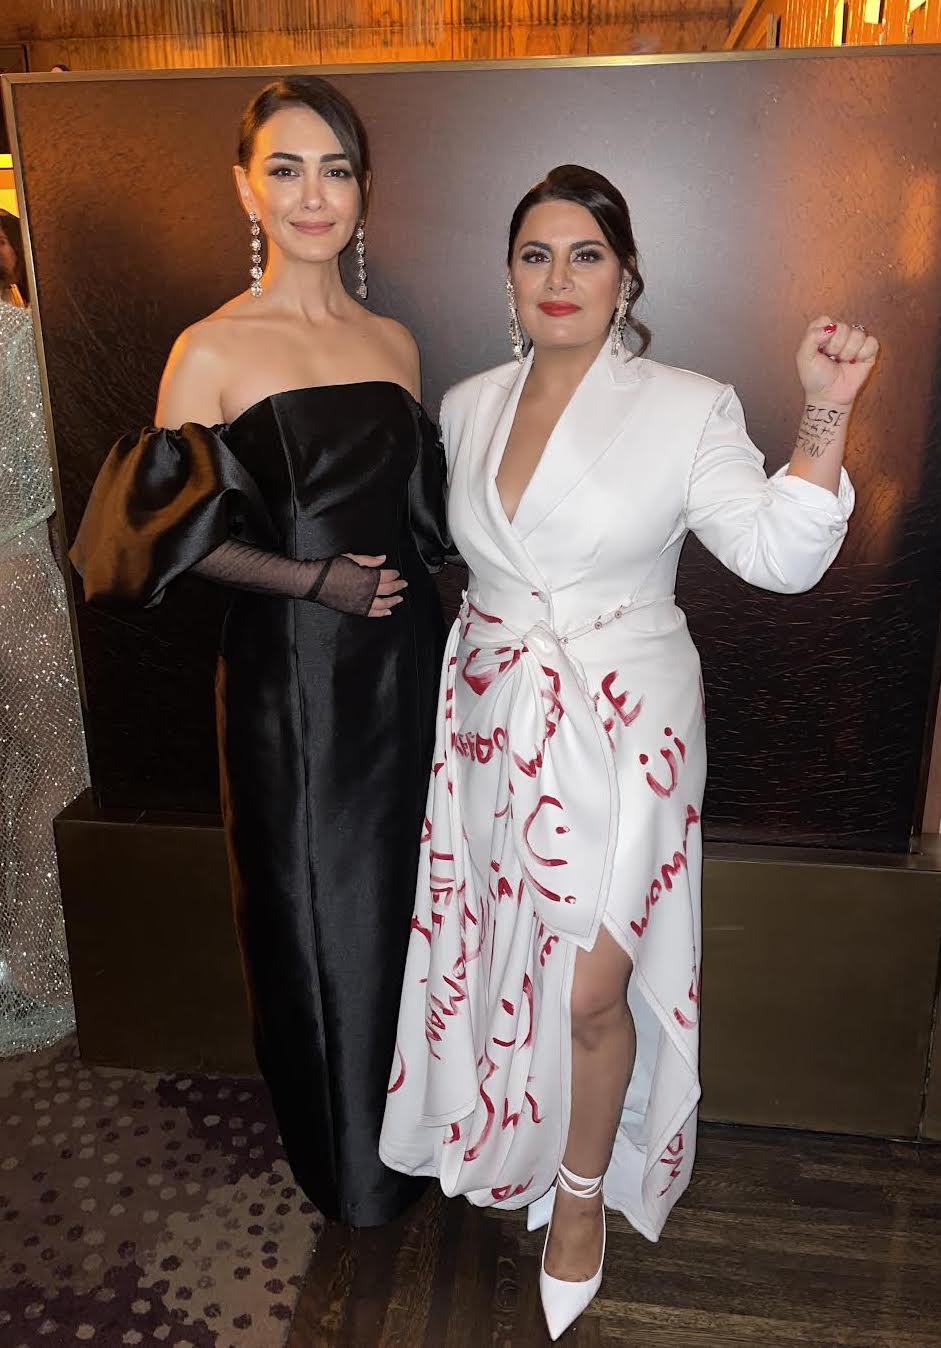 Nazanin Boniadi and Behnaz Gharamani at the Glamour Women of the Year Awards. Gharamani styled by Engie Hassan in Zaid Farouki couture to Honor Iranian Women